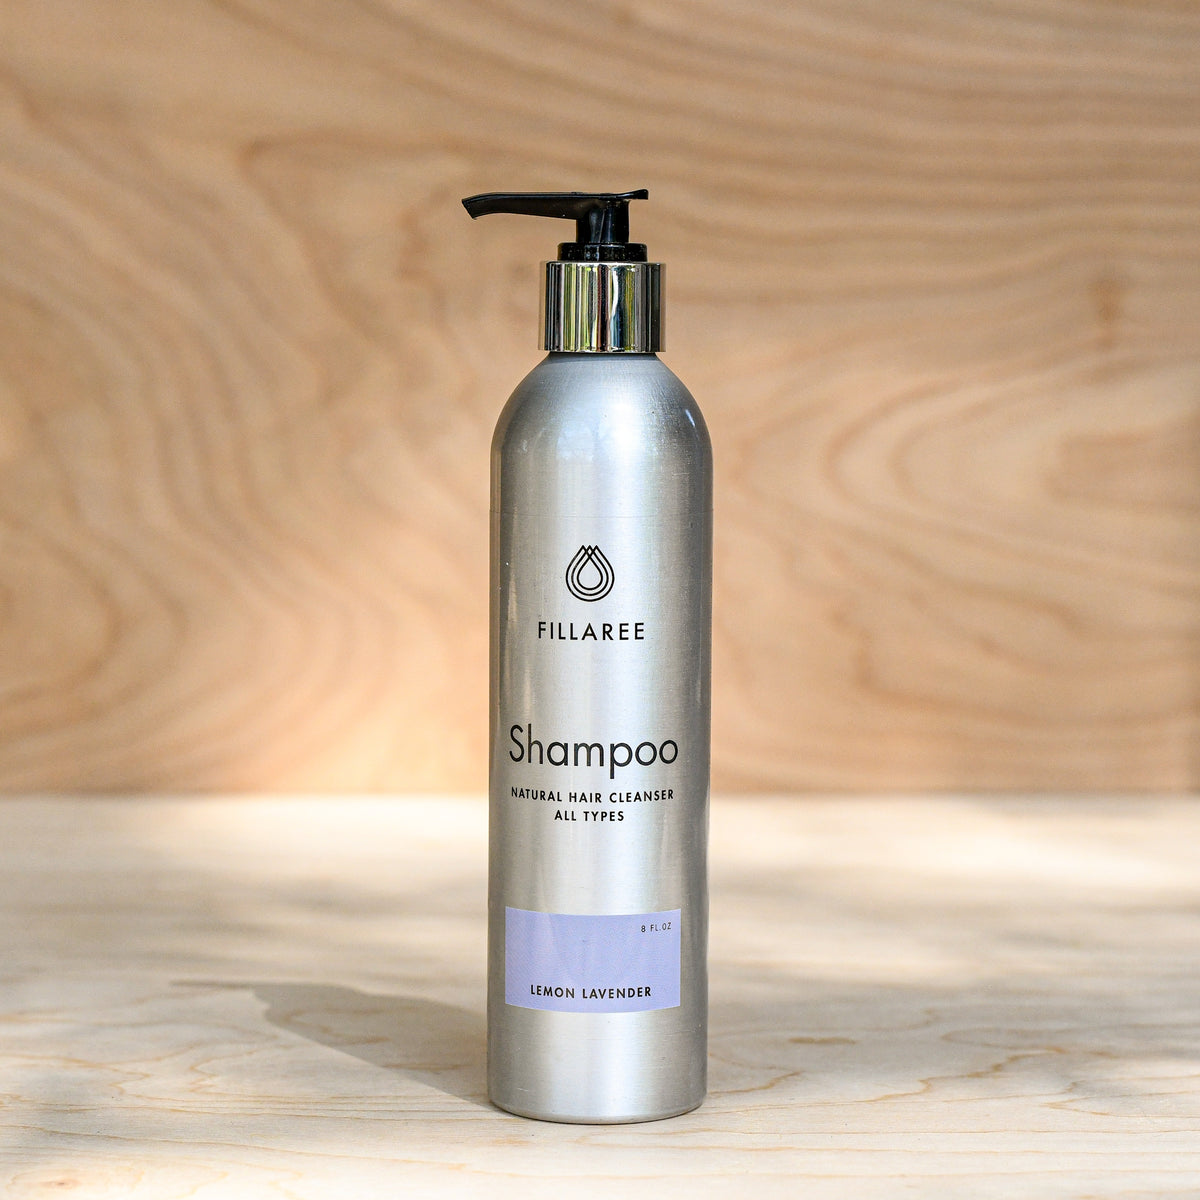 Plaine Products Refillable Shampoo Review — Sustainability